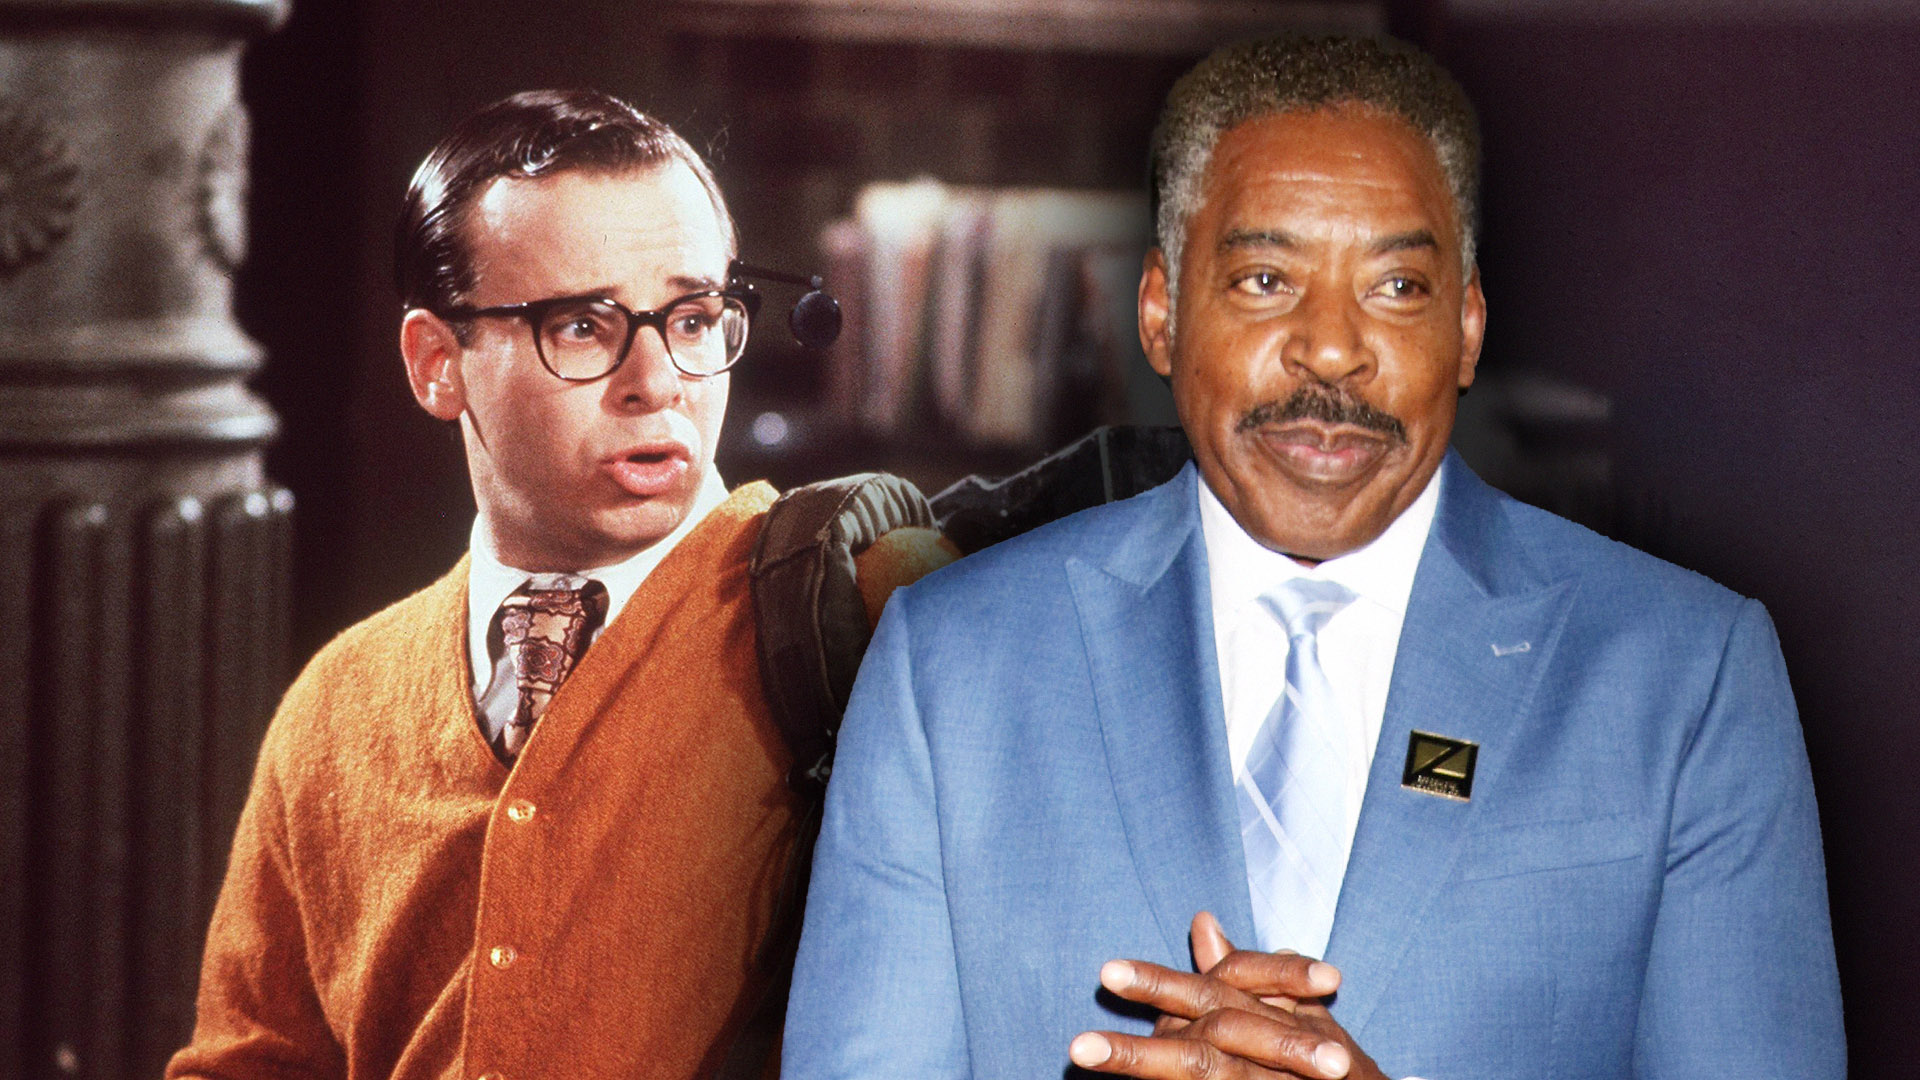 Money Wasn't the Reason Rick Moranis Didn't Appear in Ghostbusters: Frozen Empire, Ernie Hudson Says